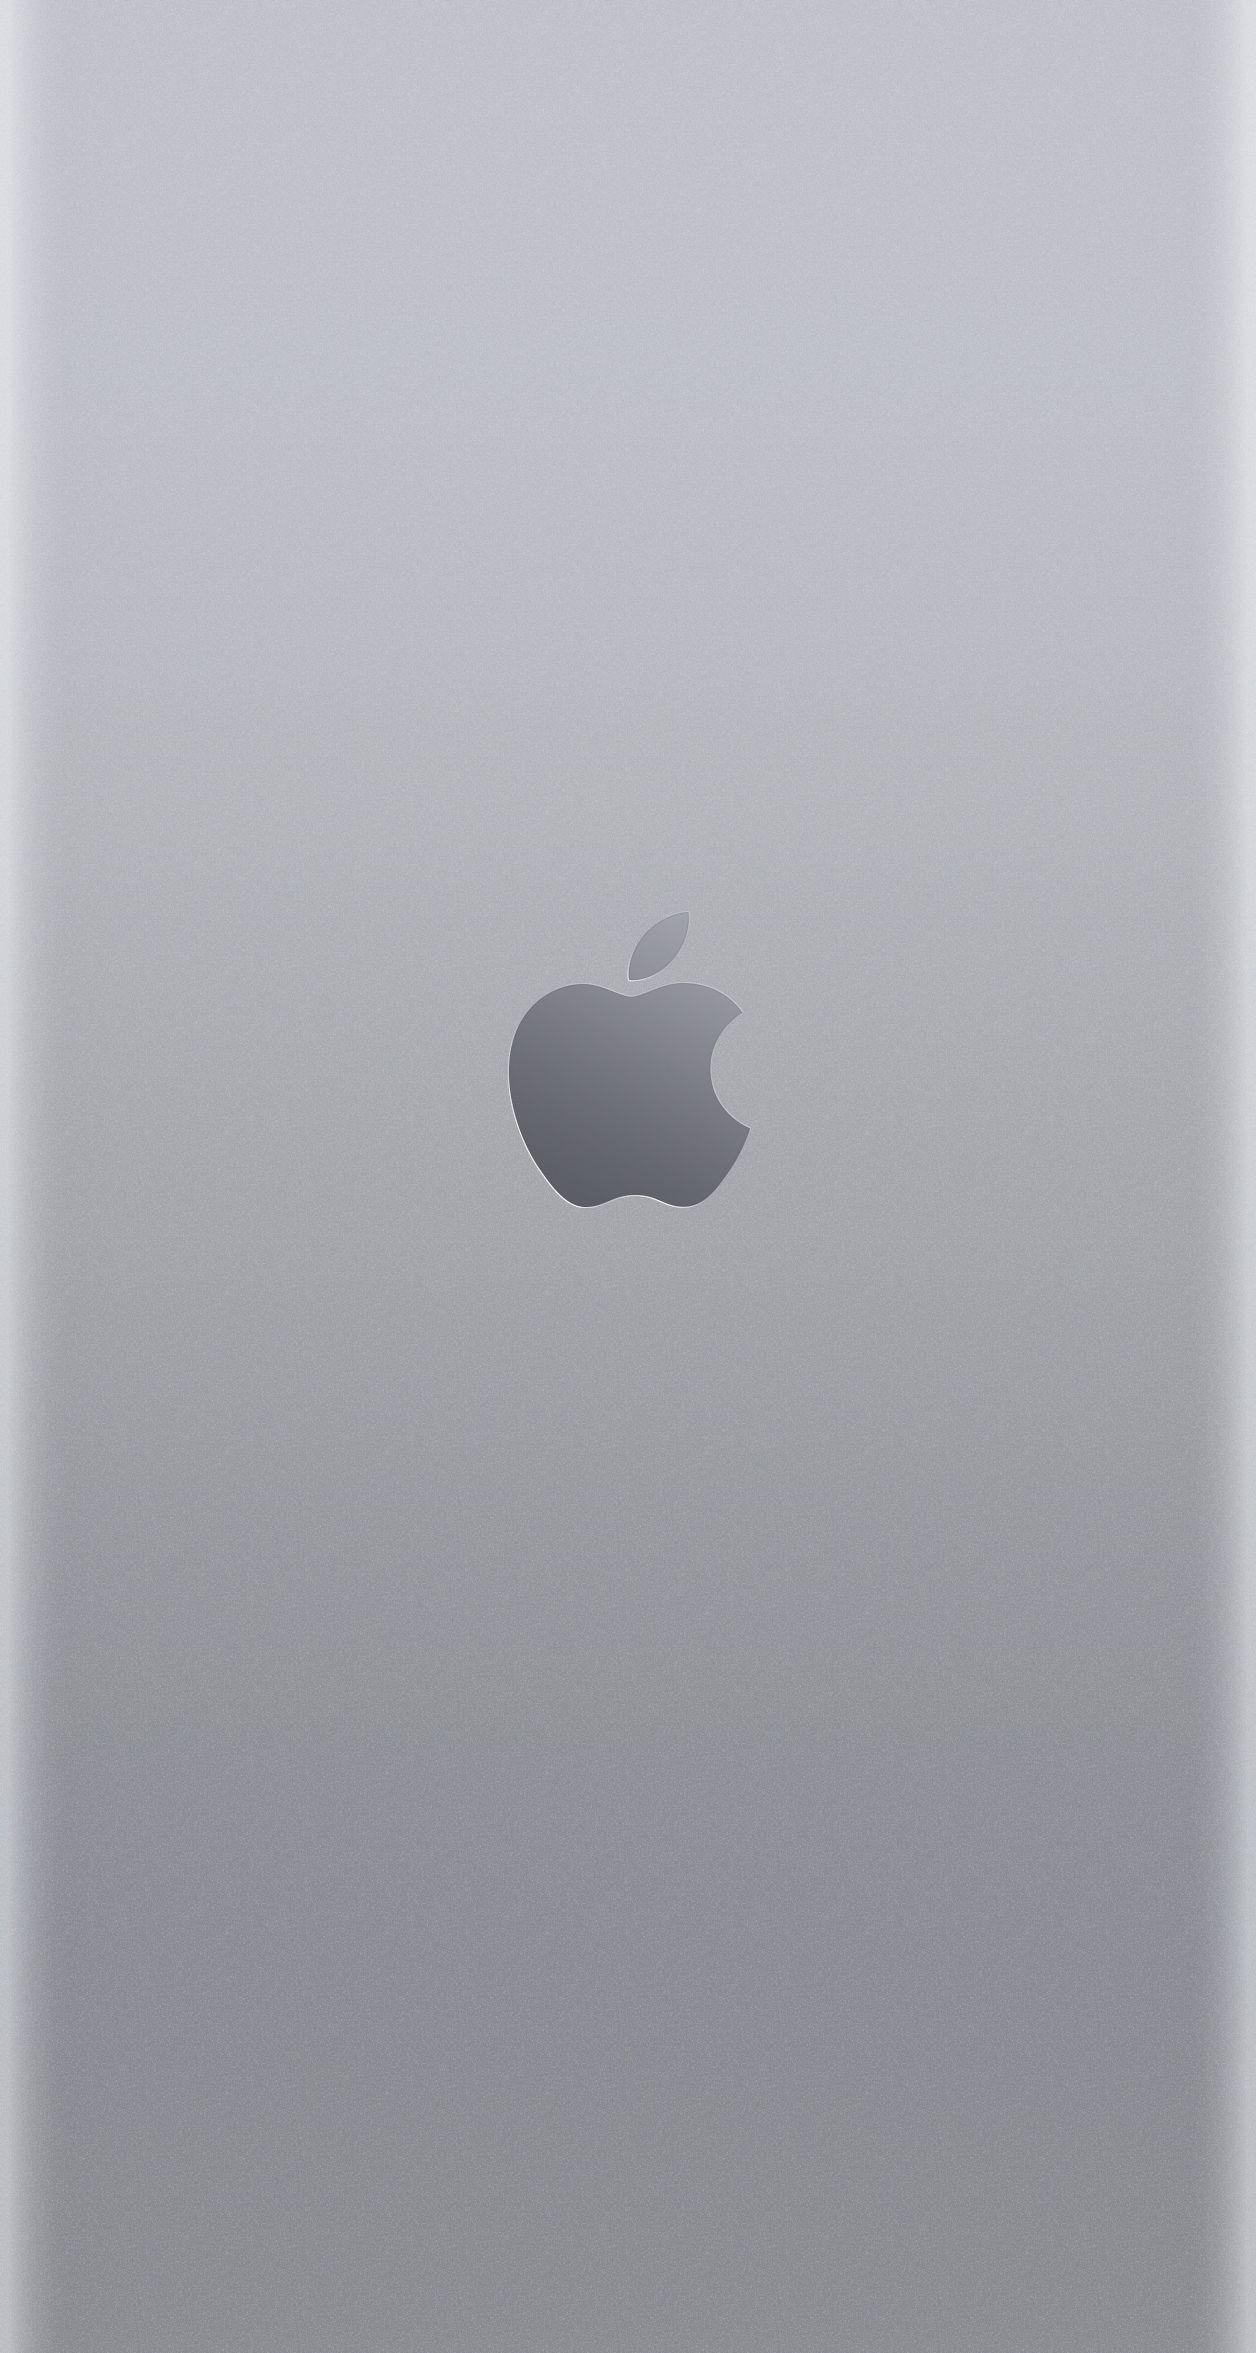 Silver Apple Logo - Apple logo wallpapers for iPhone 6